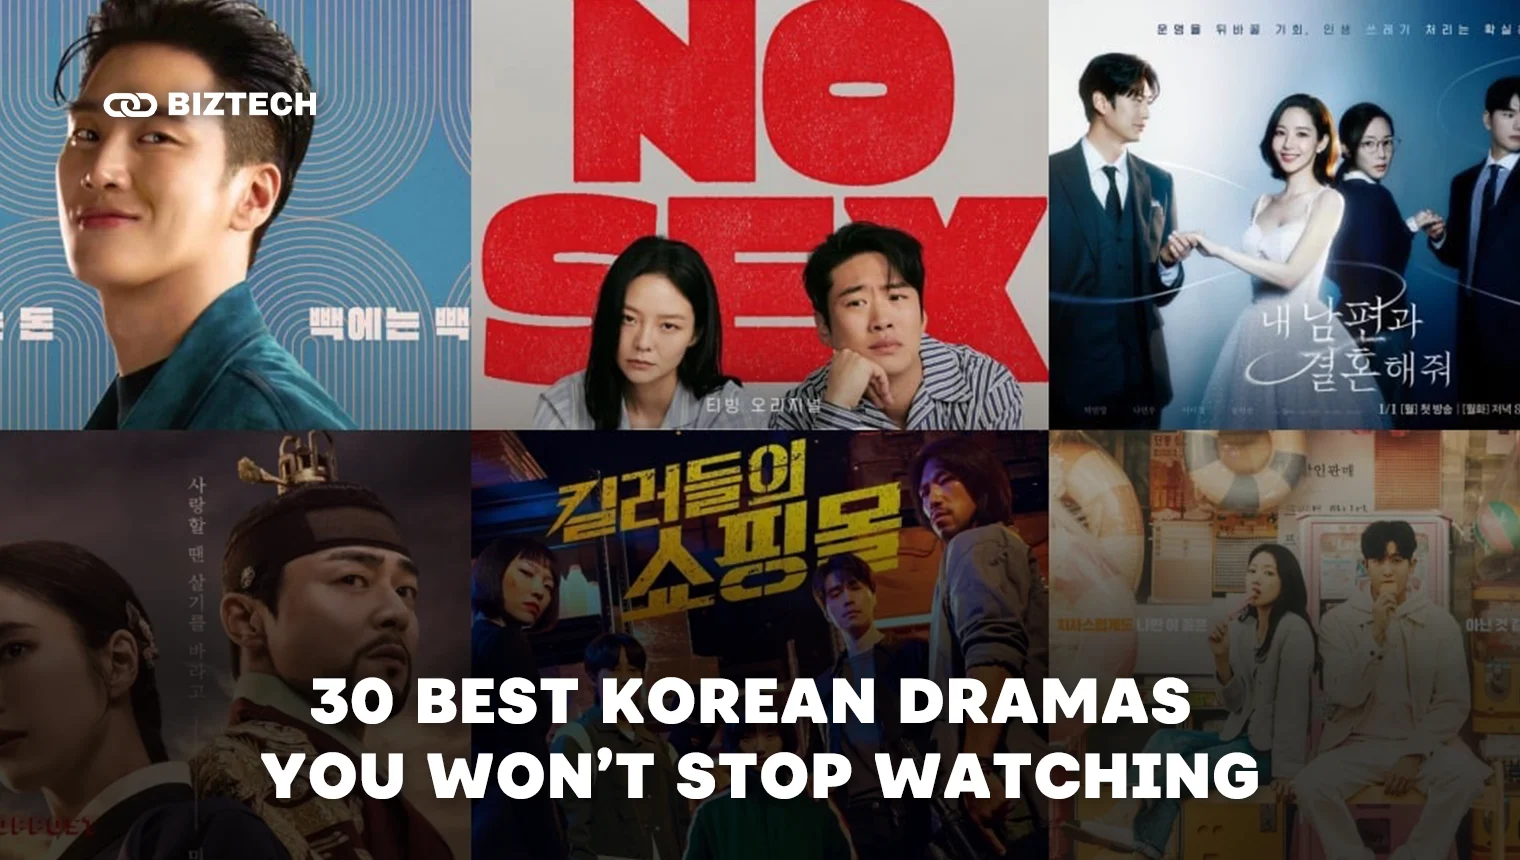 Indulge in These 30 Best Korean Dramas of All Time For Heart-pounding Plots